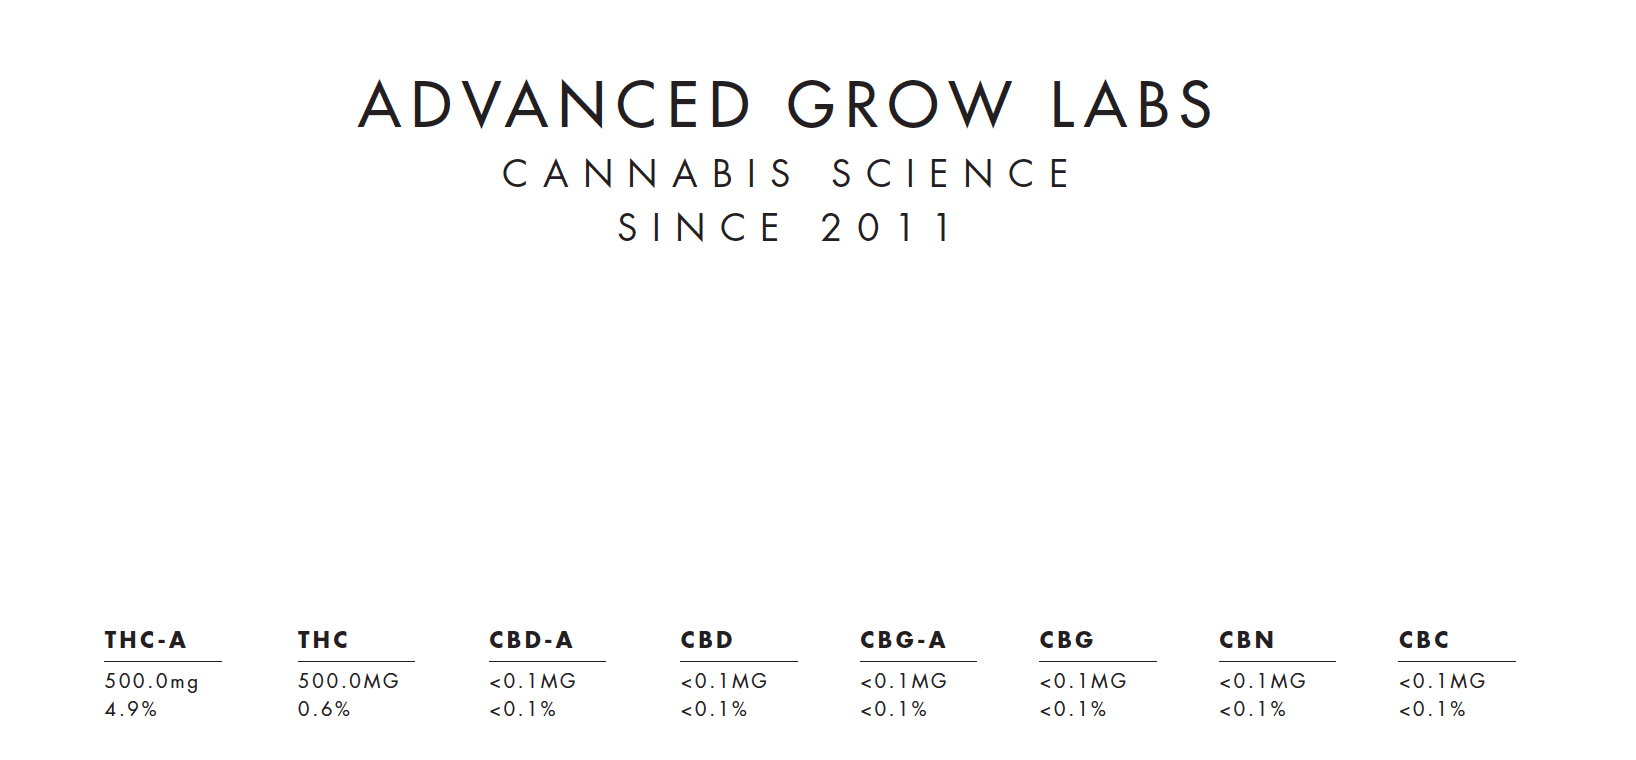 A picture of the advanced grow labs logo.